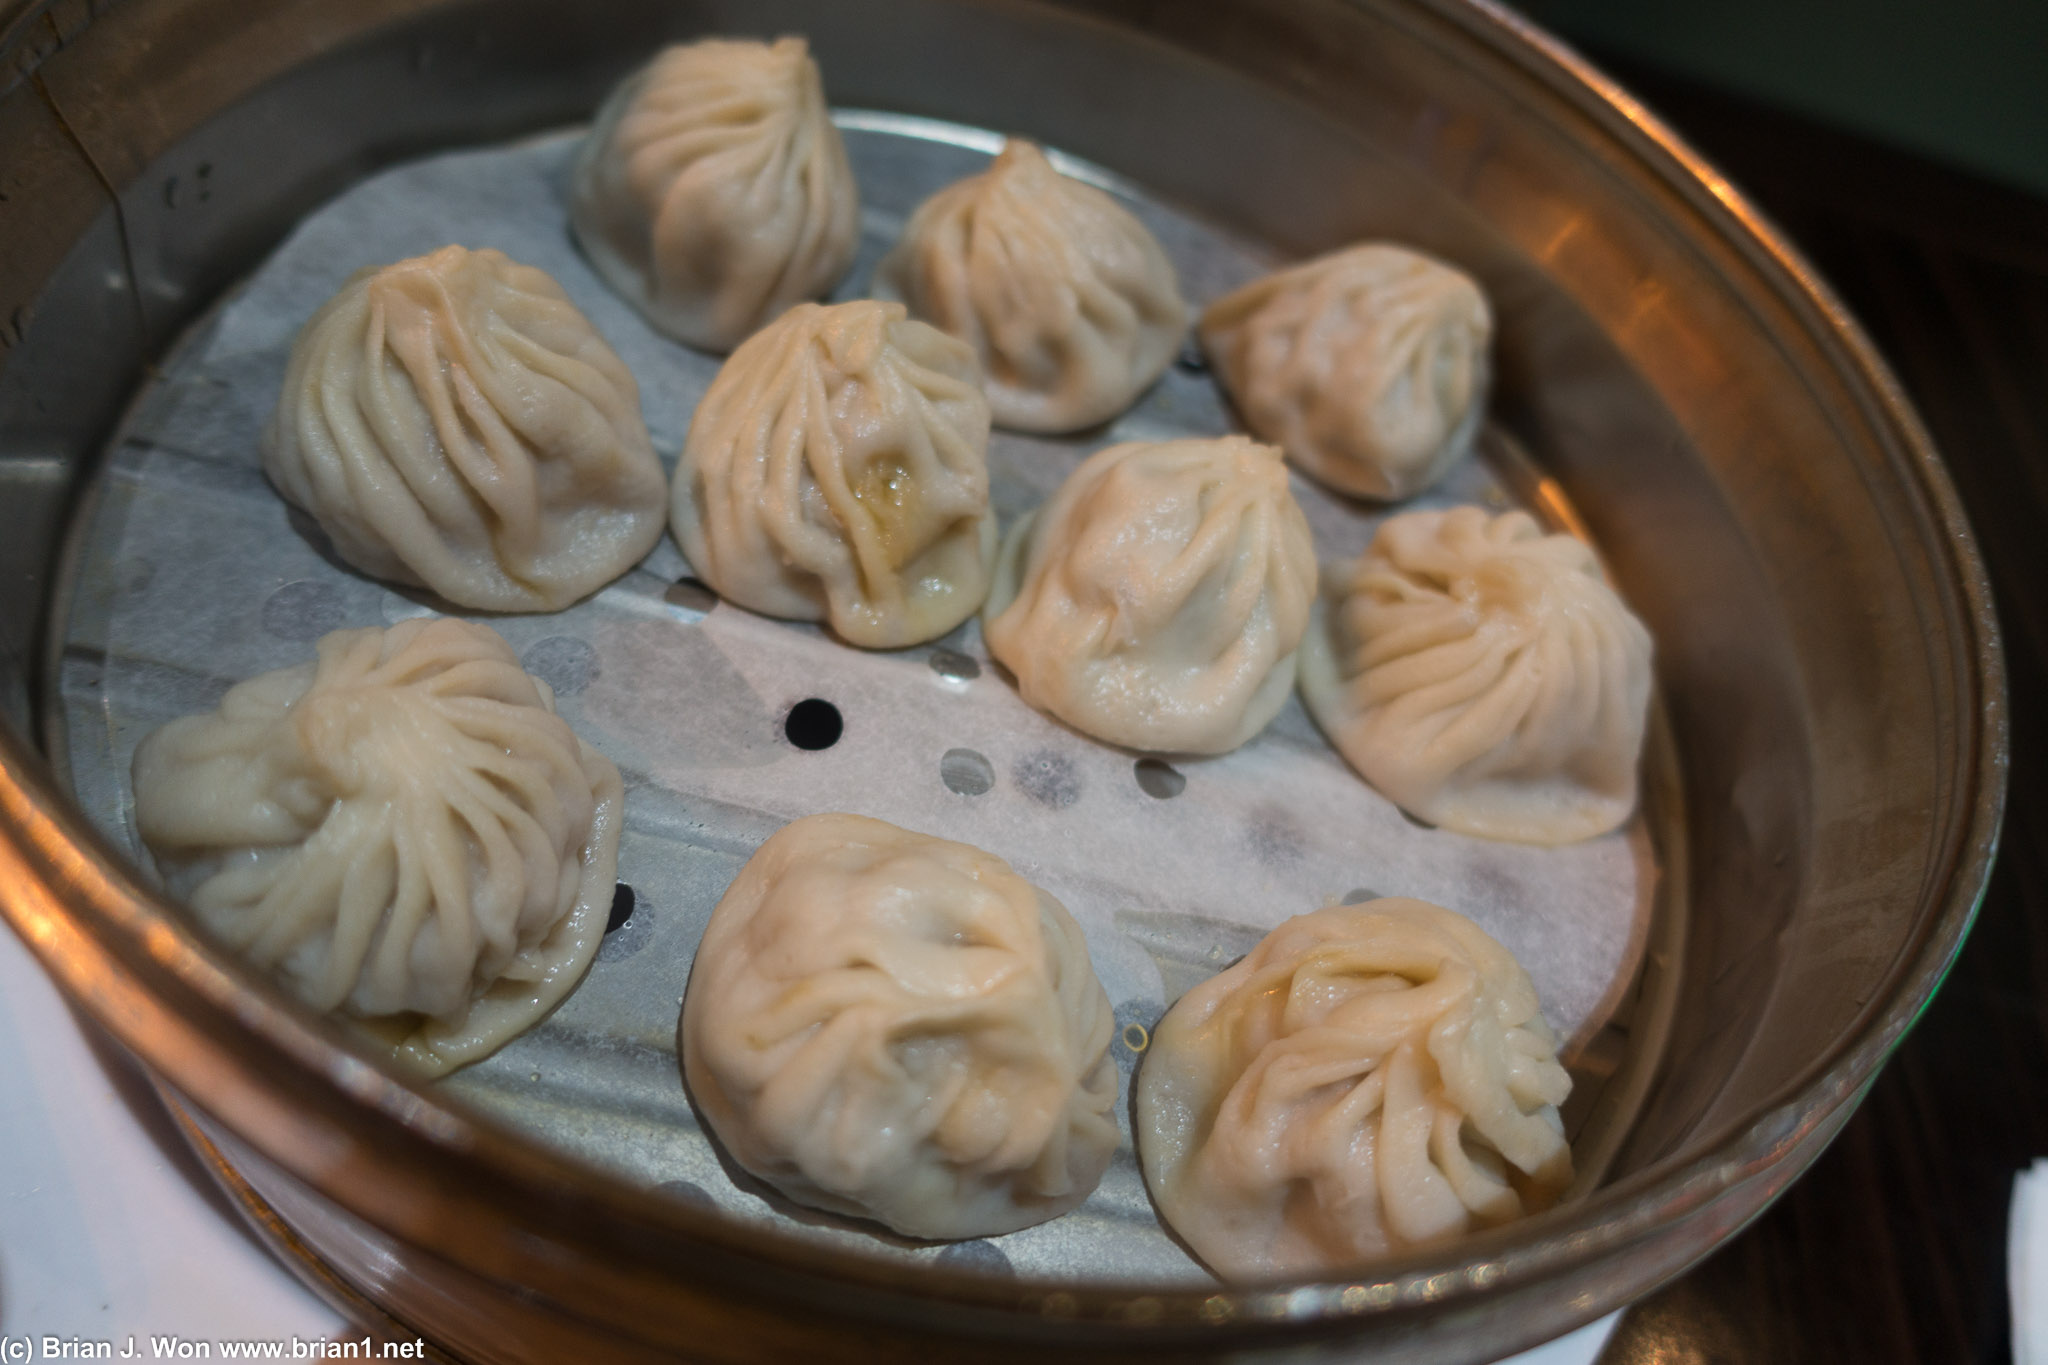 Xiao long bao. Quite decent. Not anywhere near DTF tho.